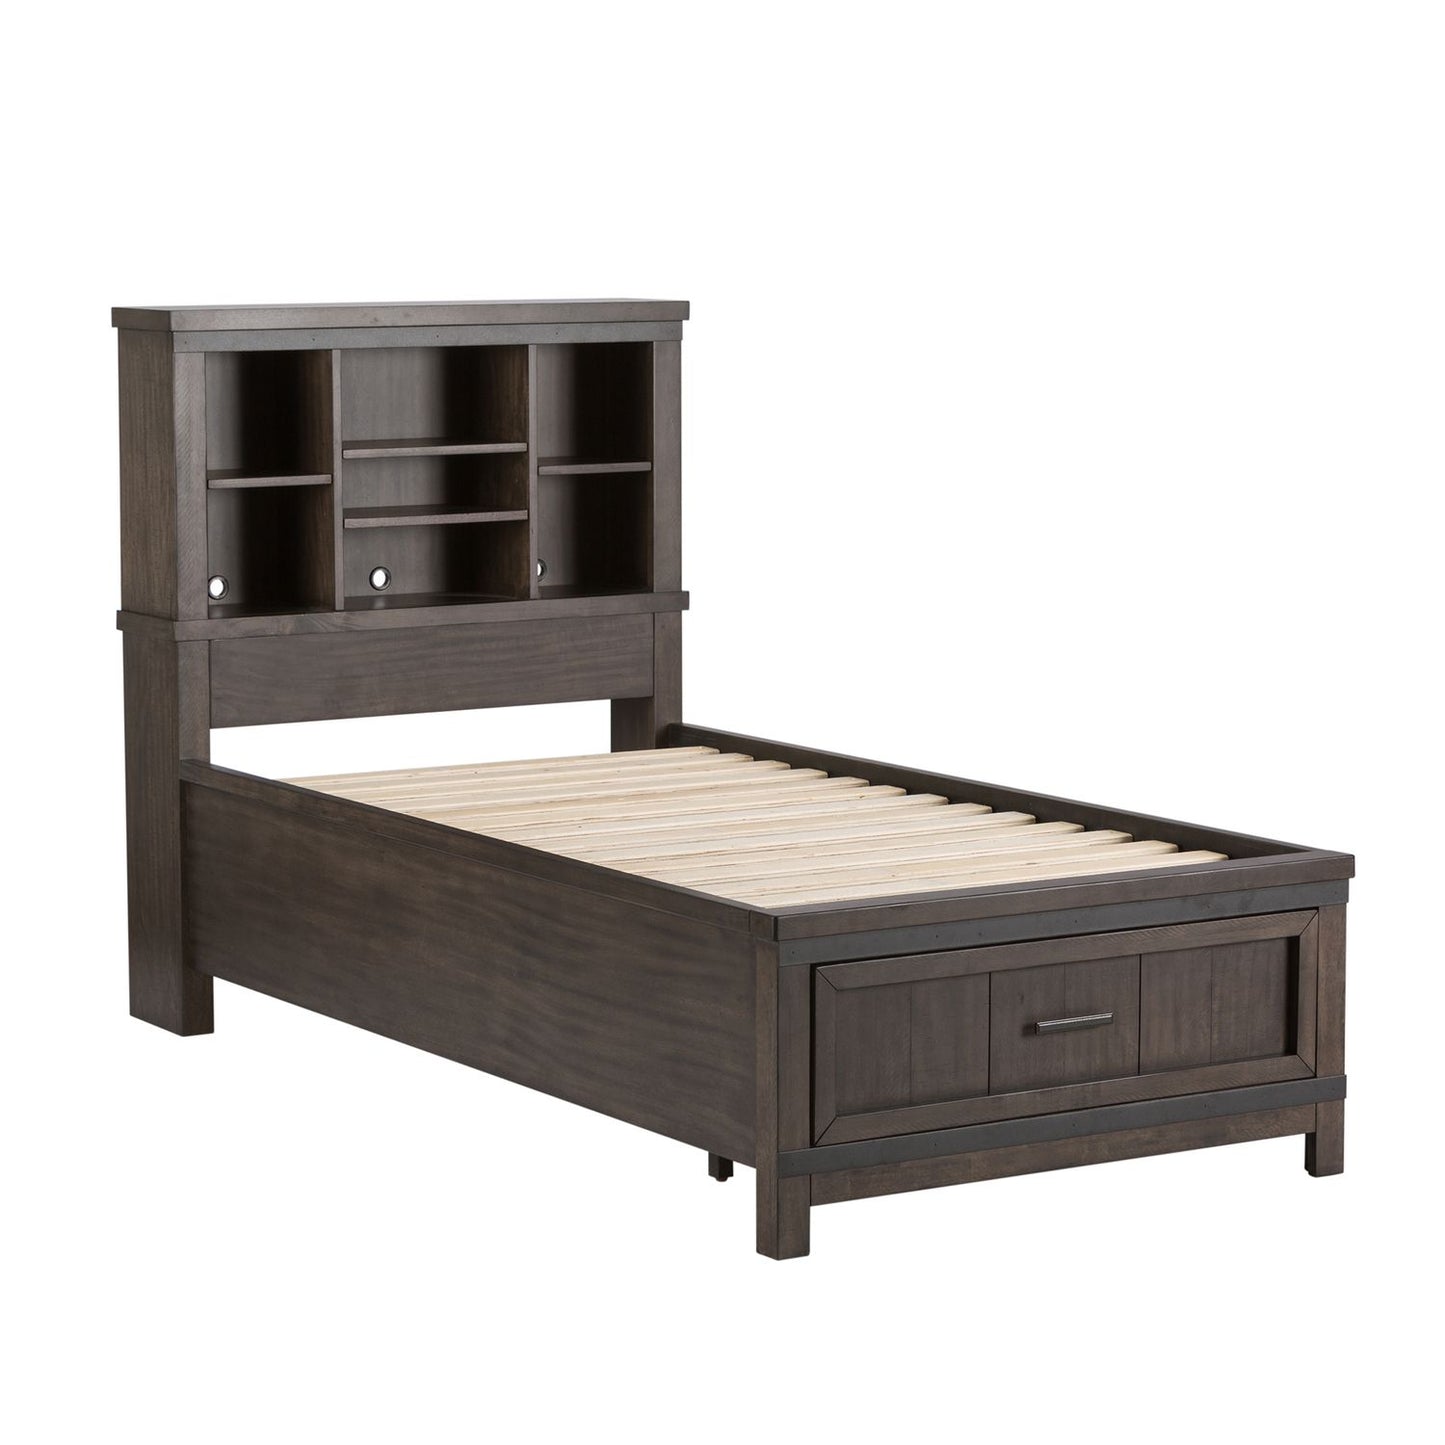 Thornwood Hills - Twin Bookcase Bed